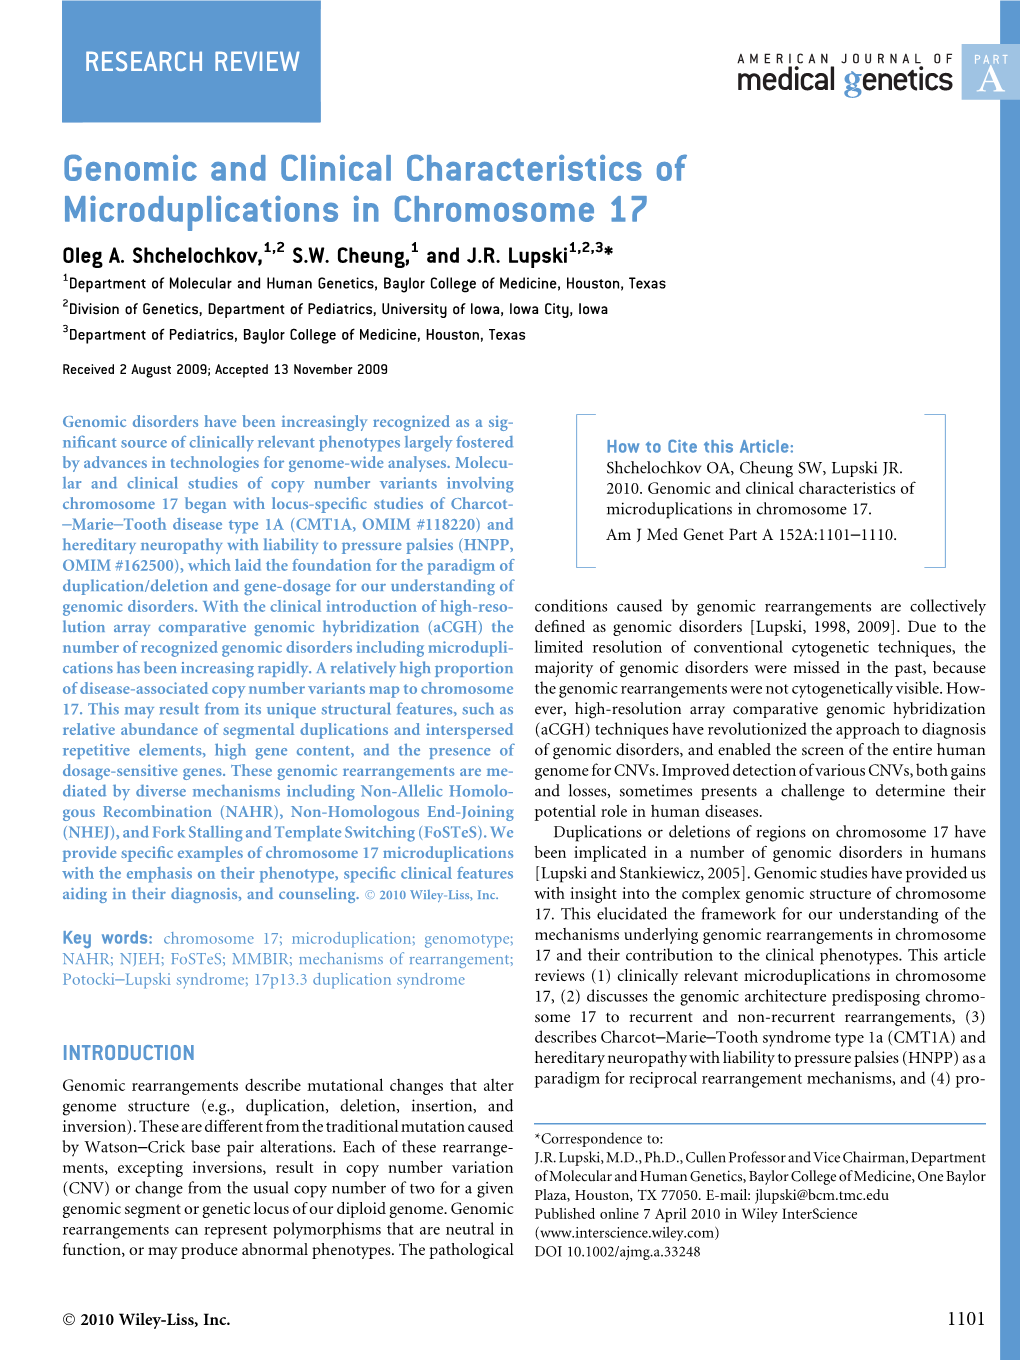 Genomic and Clinical Characteristics of Microduplications in Chromosome 17 Oleg A